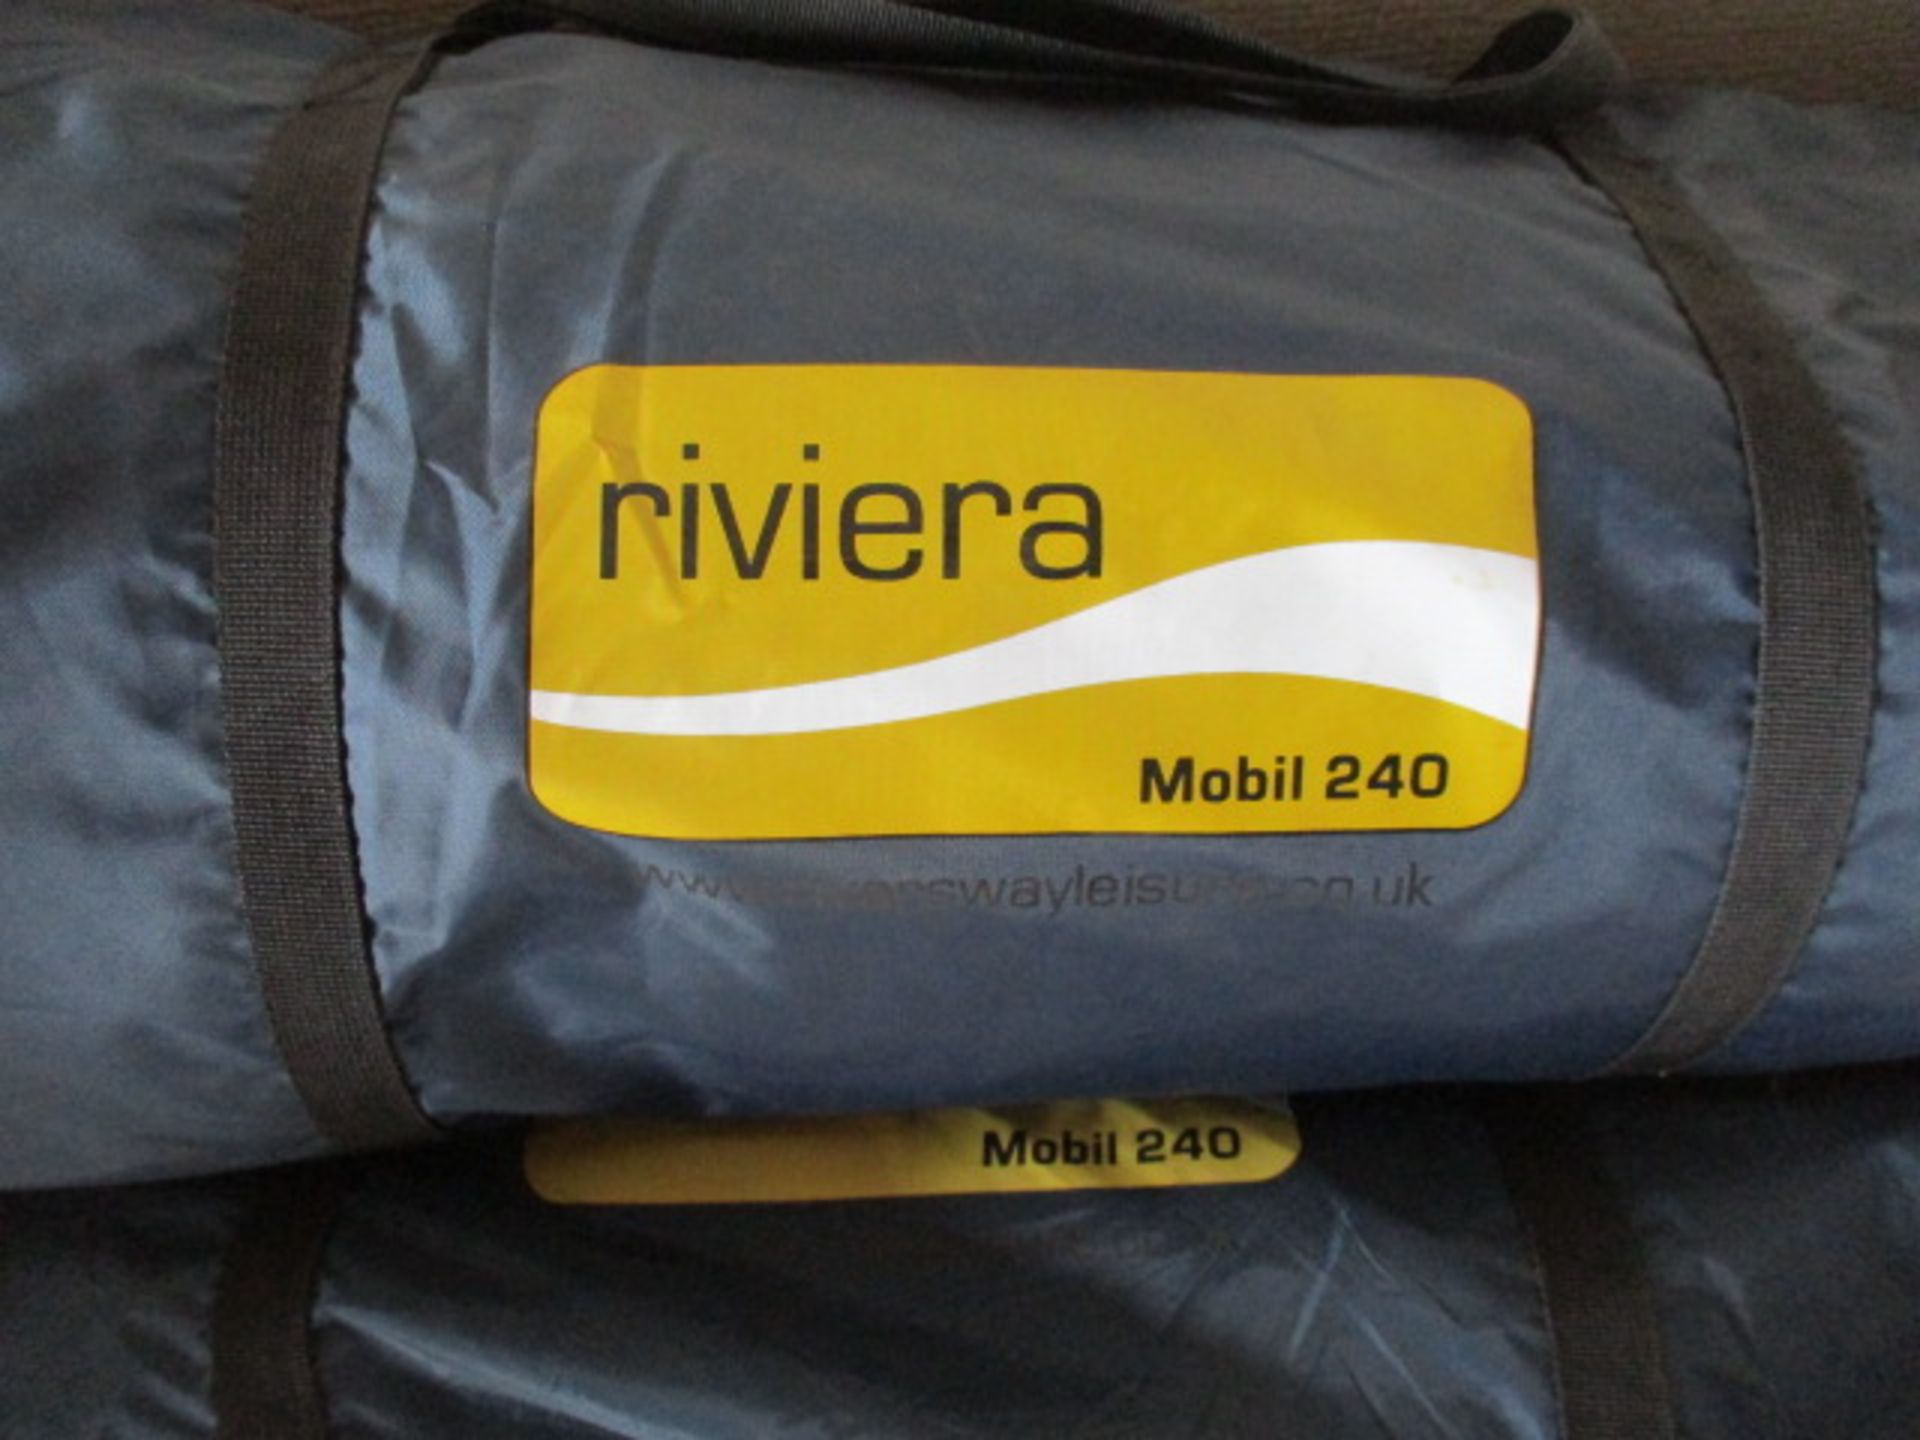 Riviera mobil 240 caravan awning as new unused RRP 369.00. Canvas Only - not a complete kit. Item - Image 2 of 2